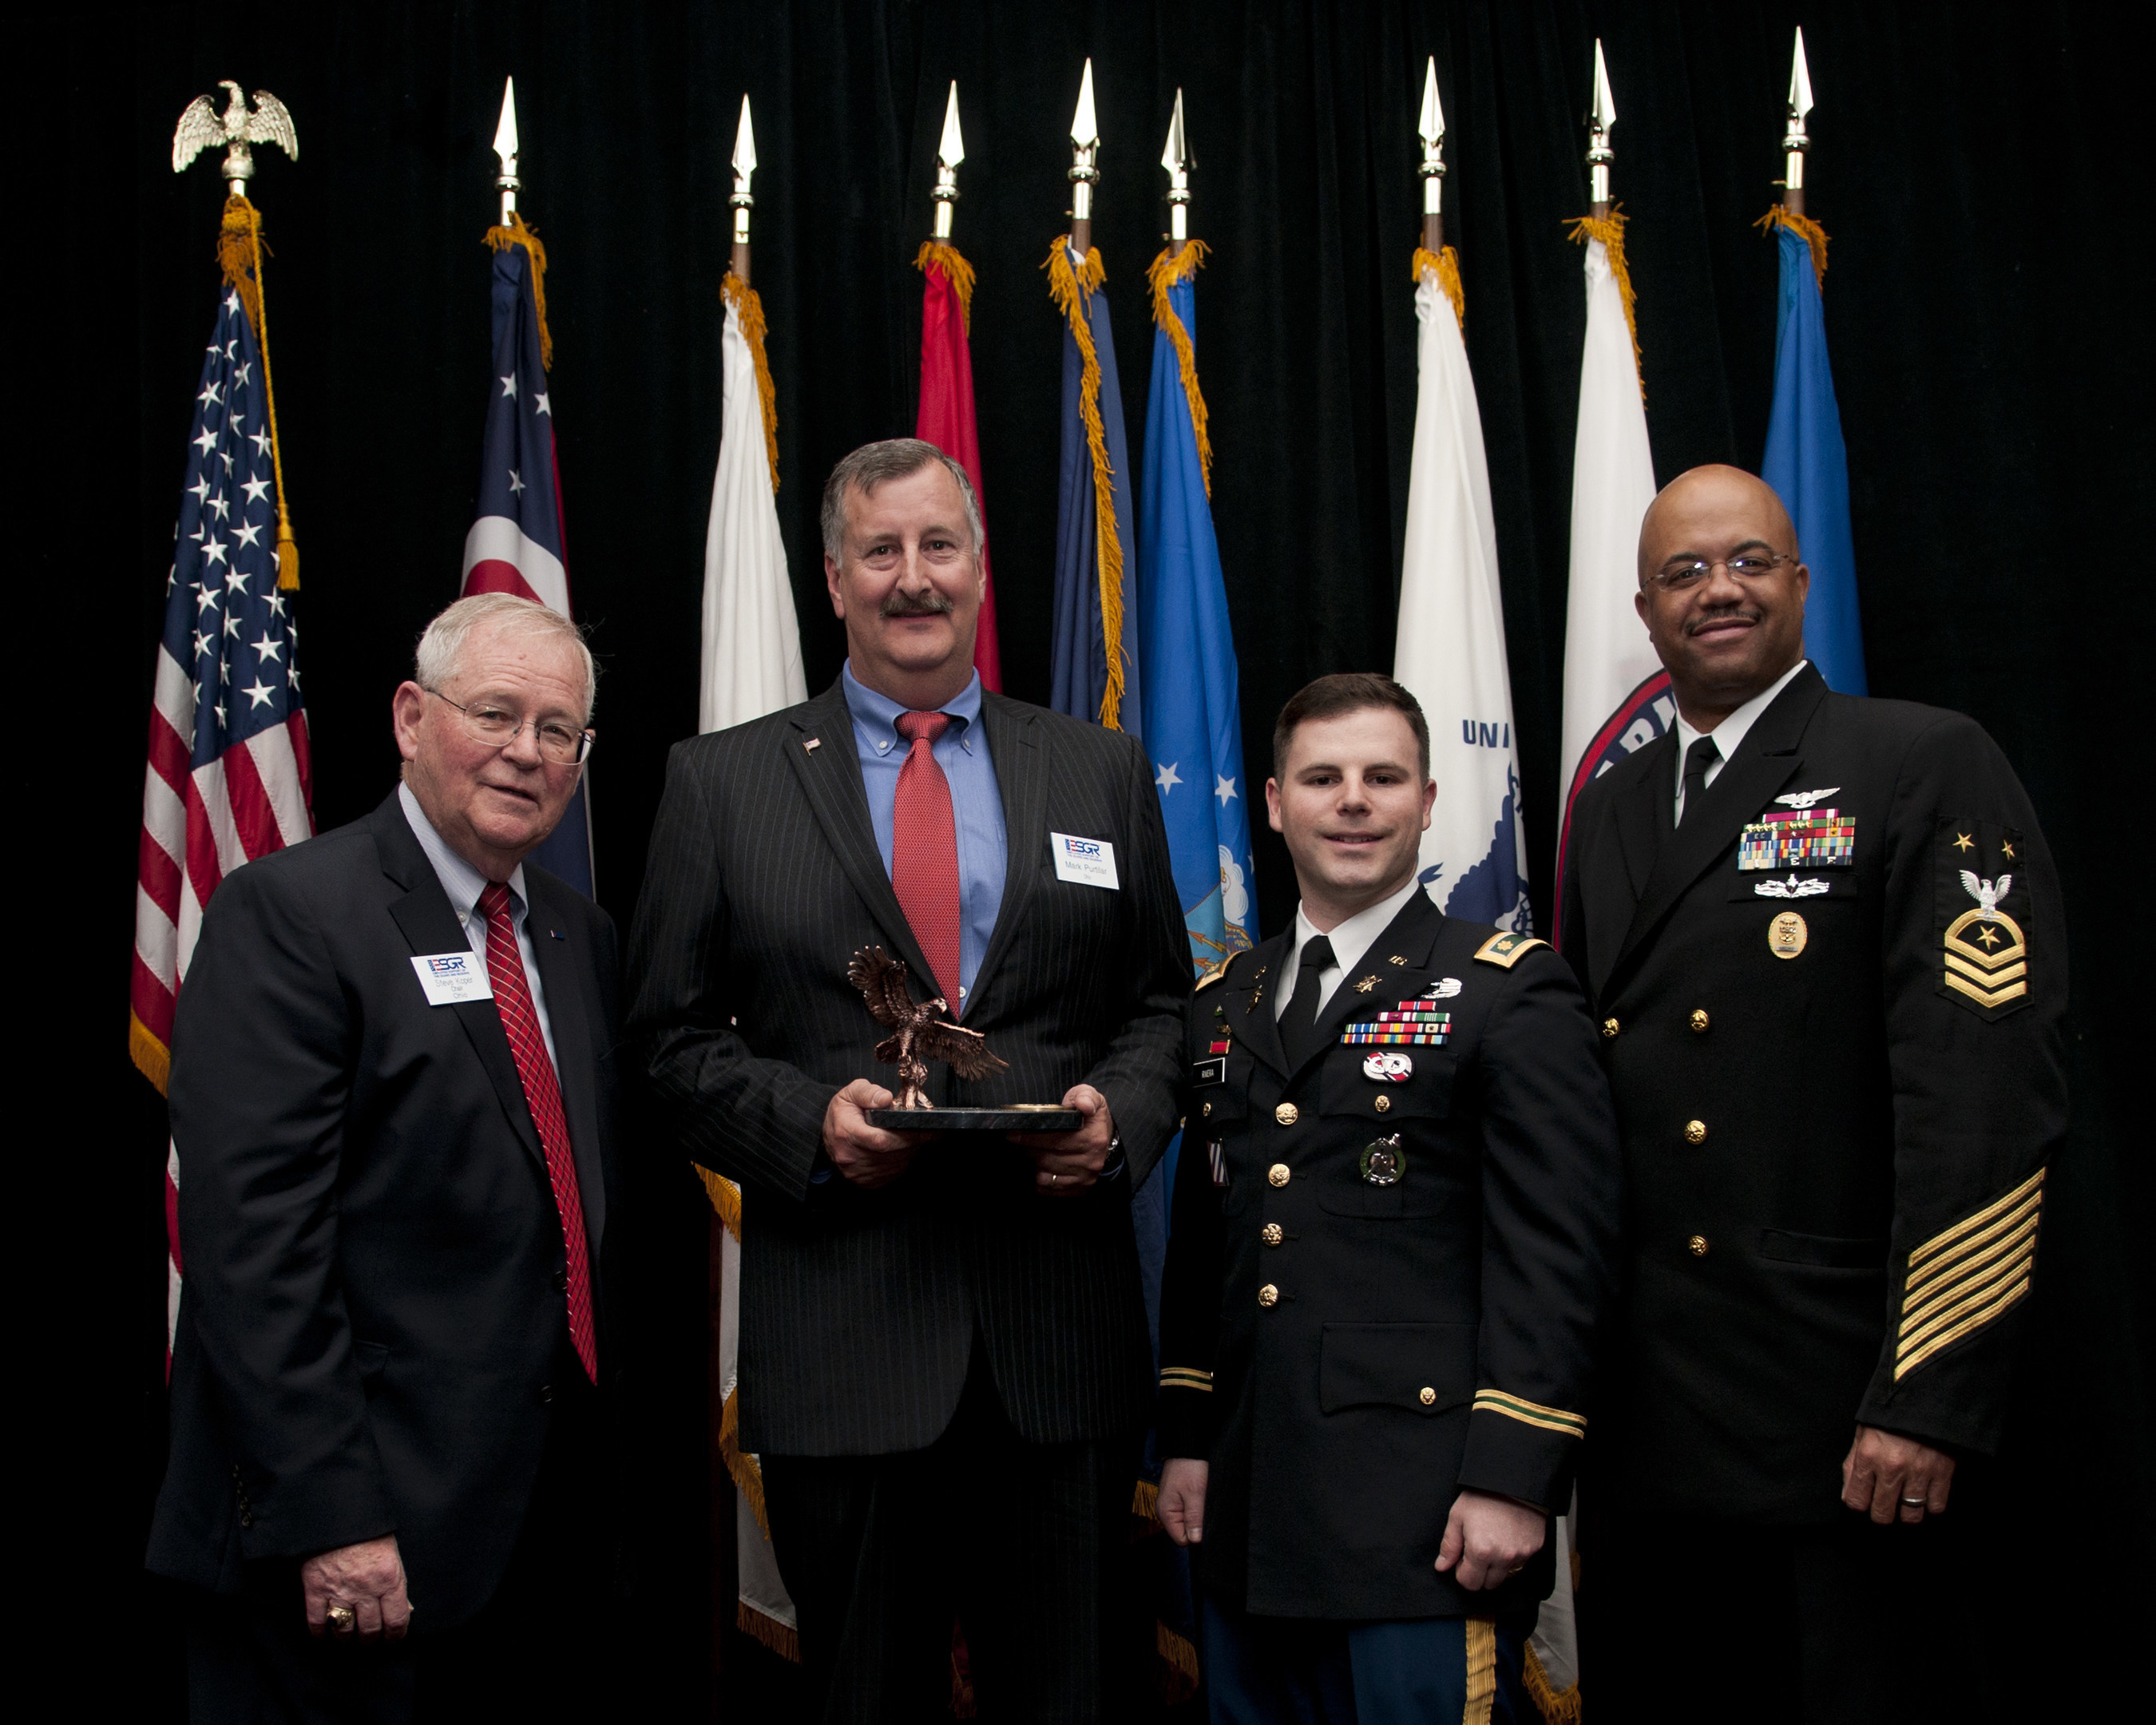 The Ohio Committee for Employer Support of the Guard and Reserve has honored The Goodyear Tire & Rubber Company with the Pro Patria Award. Shown with the award (from left) are: Retired Air Force Brig. Gen. Stephen Koper; Mark Purtilar, vice president and Chief Procurement Officer of The Goodyear Tire & Rubber Company; Veteran and Supplier Qualification Project Leader Jose Rivera; and Force Master Chief C.J. Mitchell, U.S. Navy Reserve.